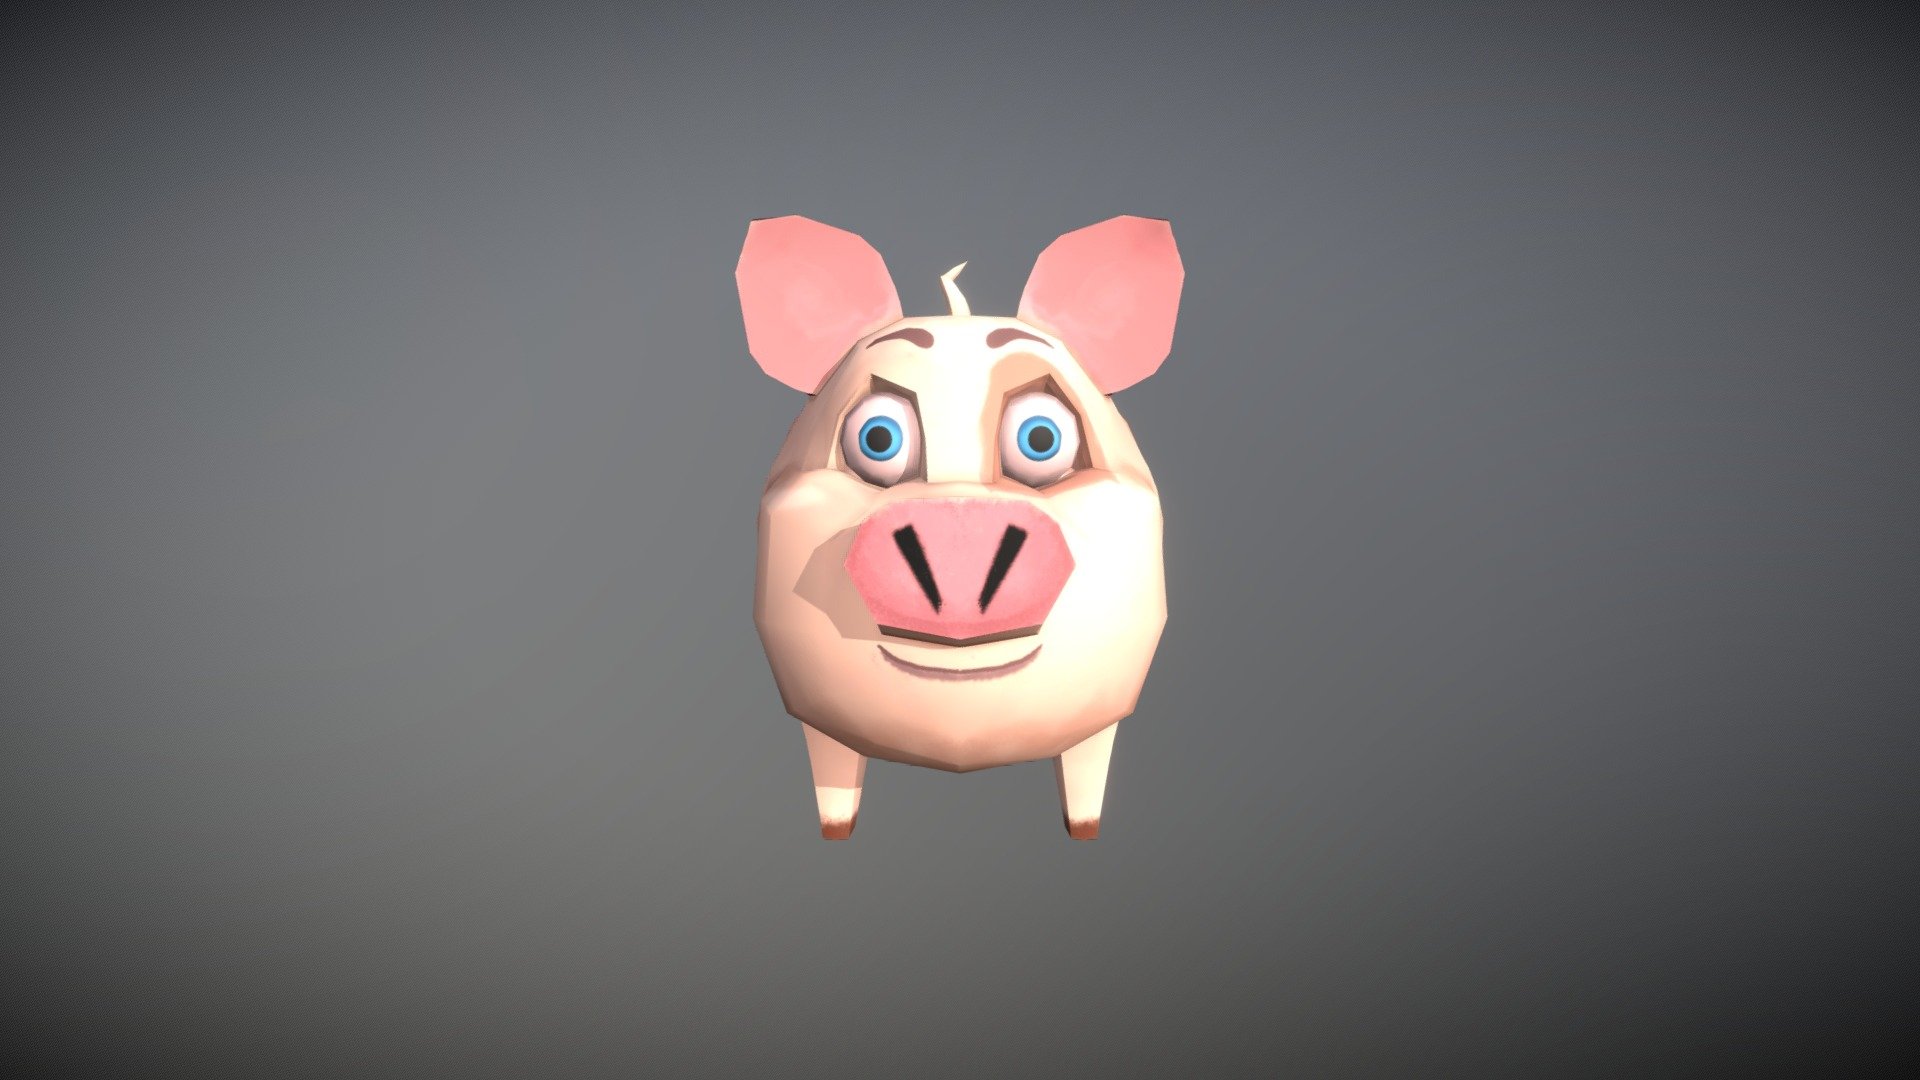 completed this lowpoly model with stylized texture in substance painter - Pig | stylized character | lowpoly character - Download Free 3D model by njaiswar 3d model